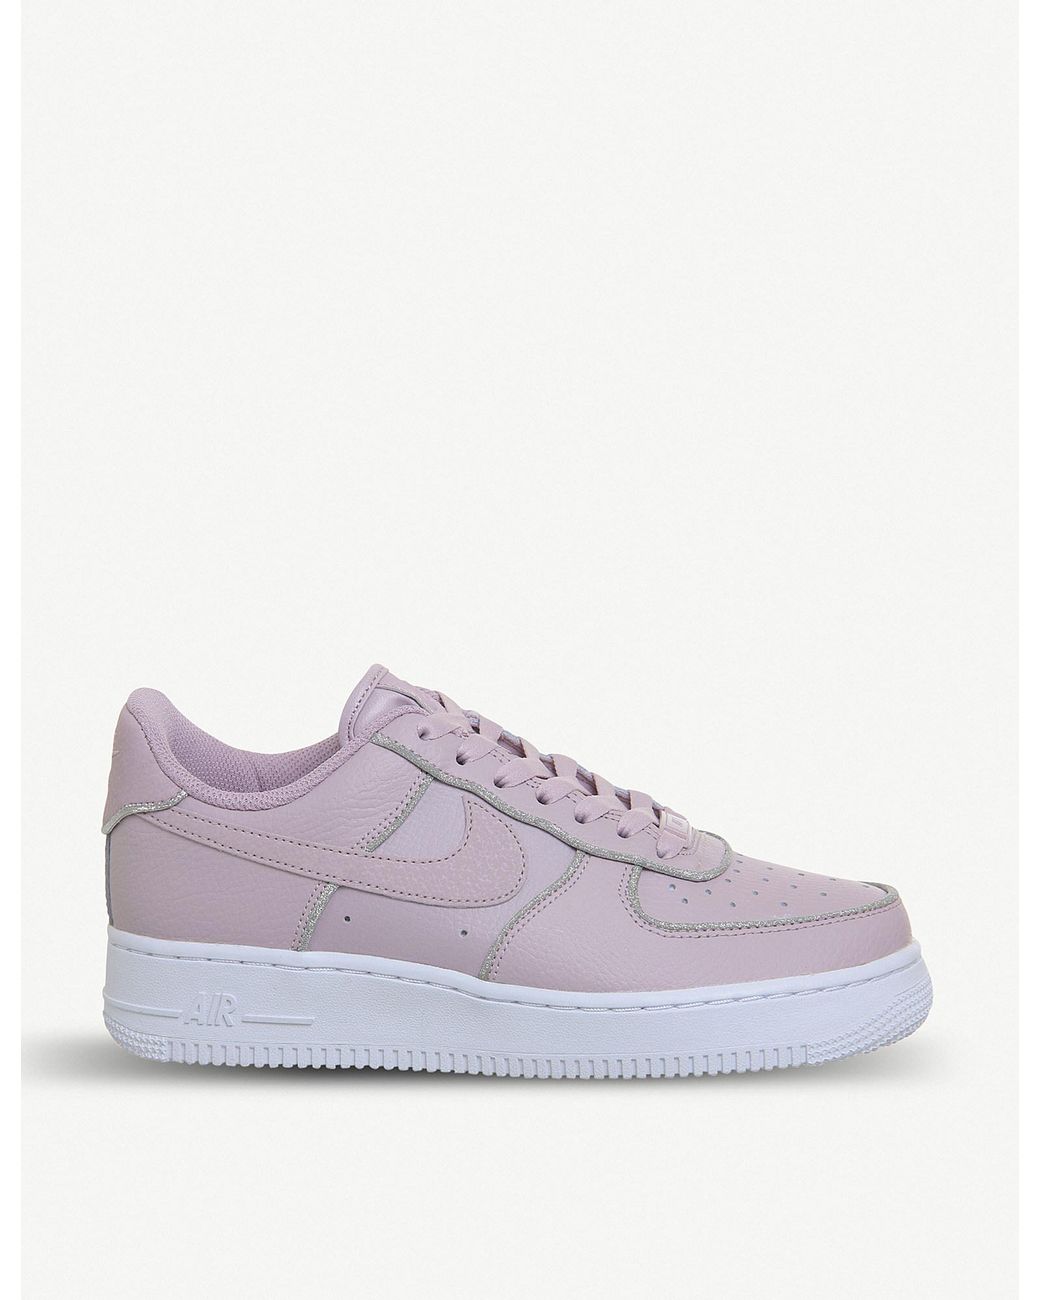 Nike Leather Air Force 1 07 Trainers in Rose Glitter (Purple) | Lyst UK